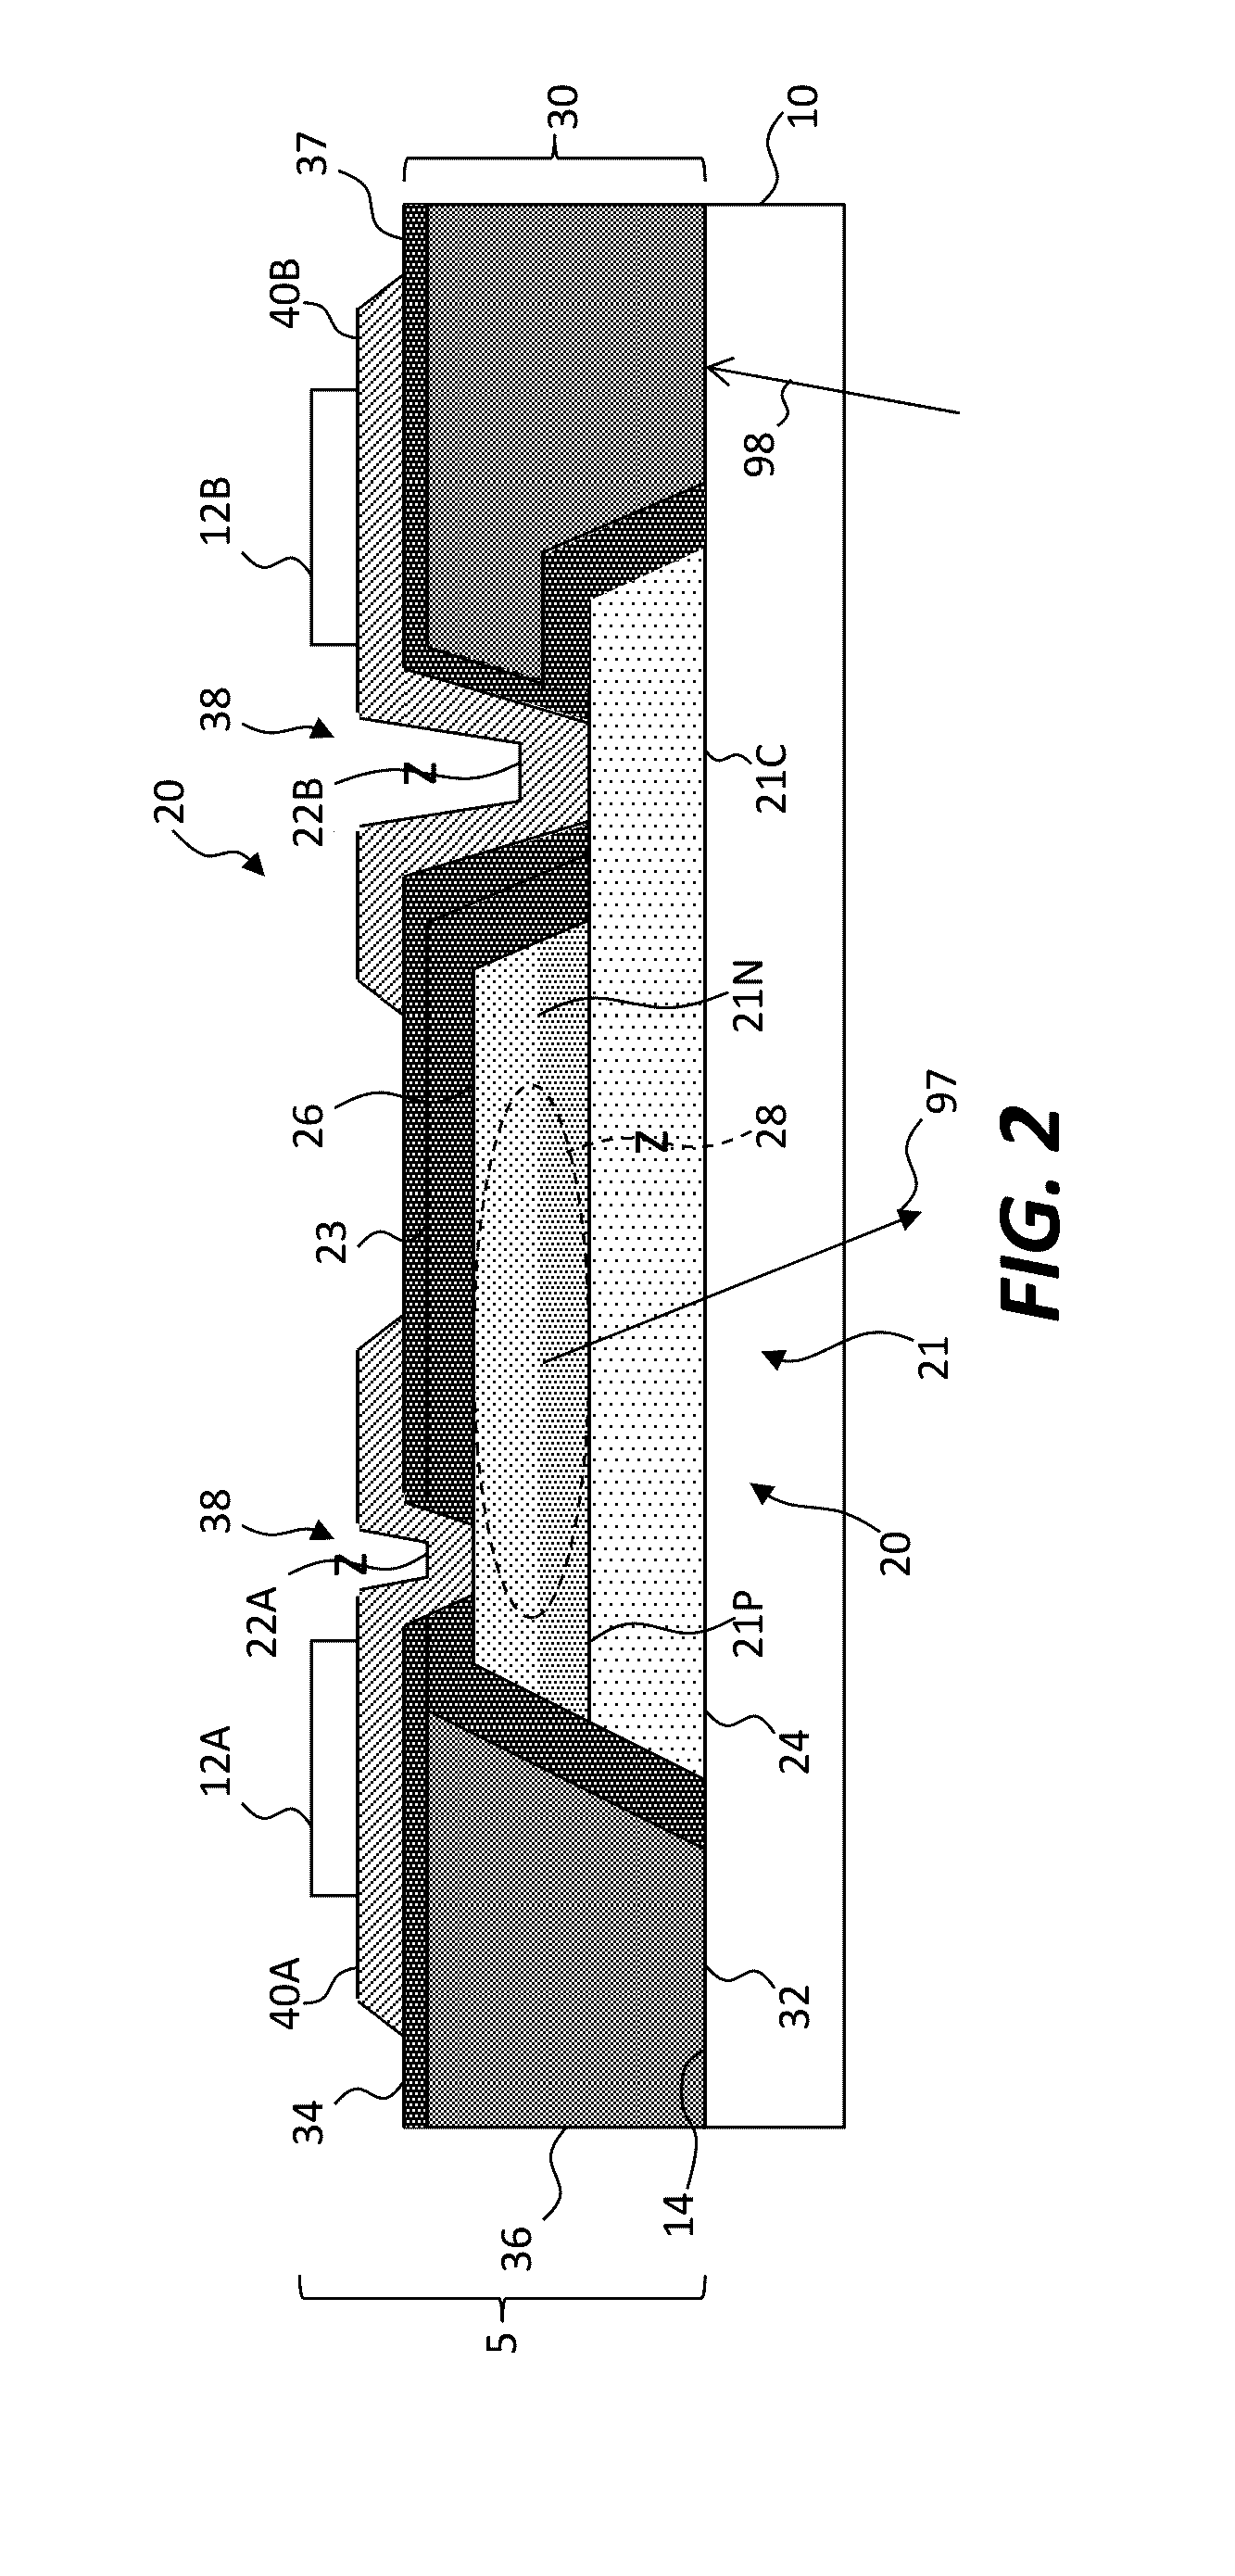 Display tile structure and tiled display